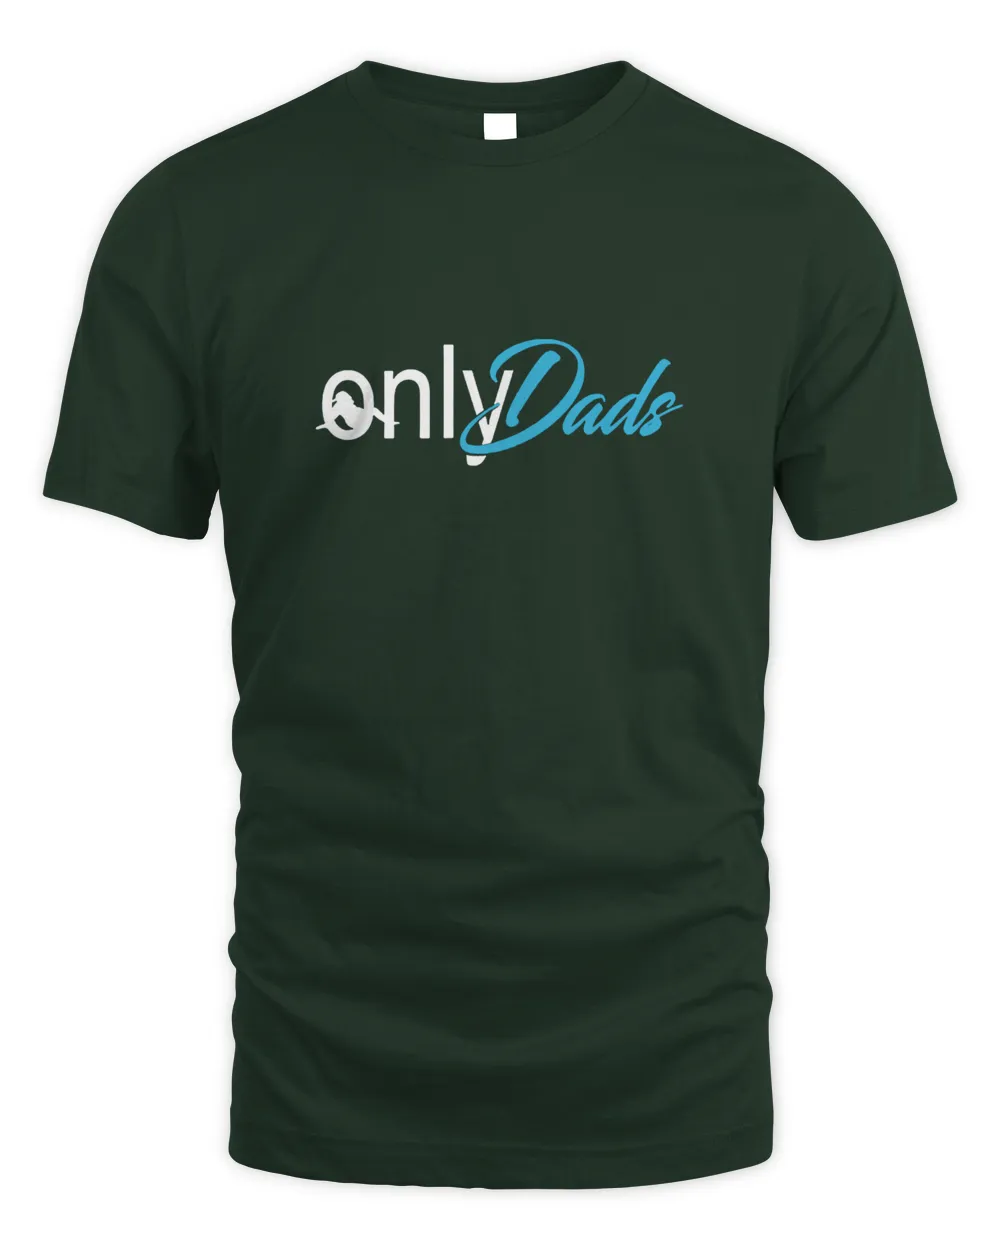 Only Dads Unisex Tshirt, Gift Shirt